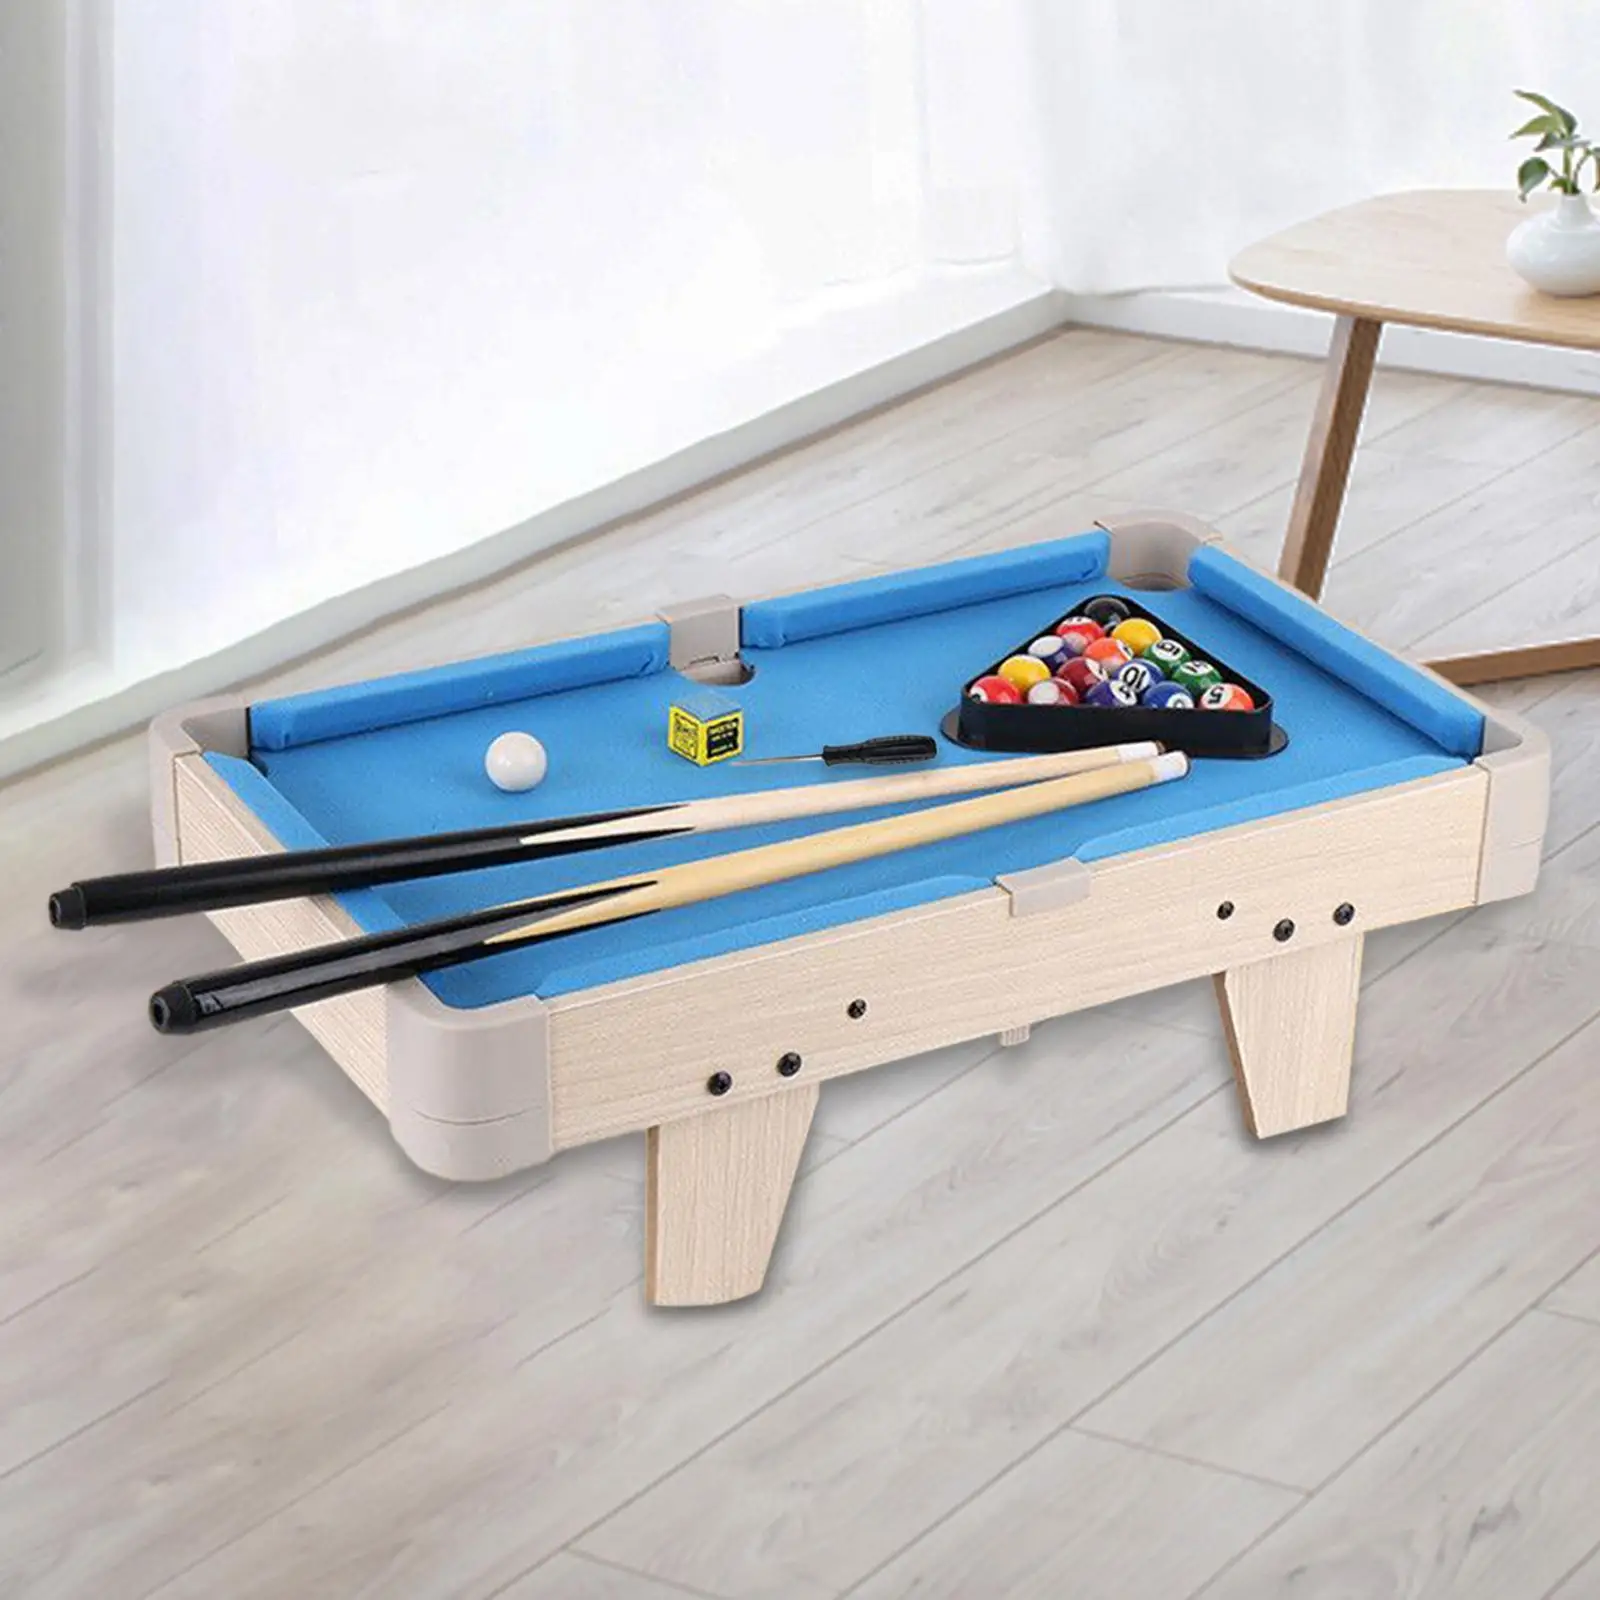 Tabletop Pool Table Home Use Leisure Interaction Toys Portable Small Billiards Game for Children Family Boys Girls Kids Adults